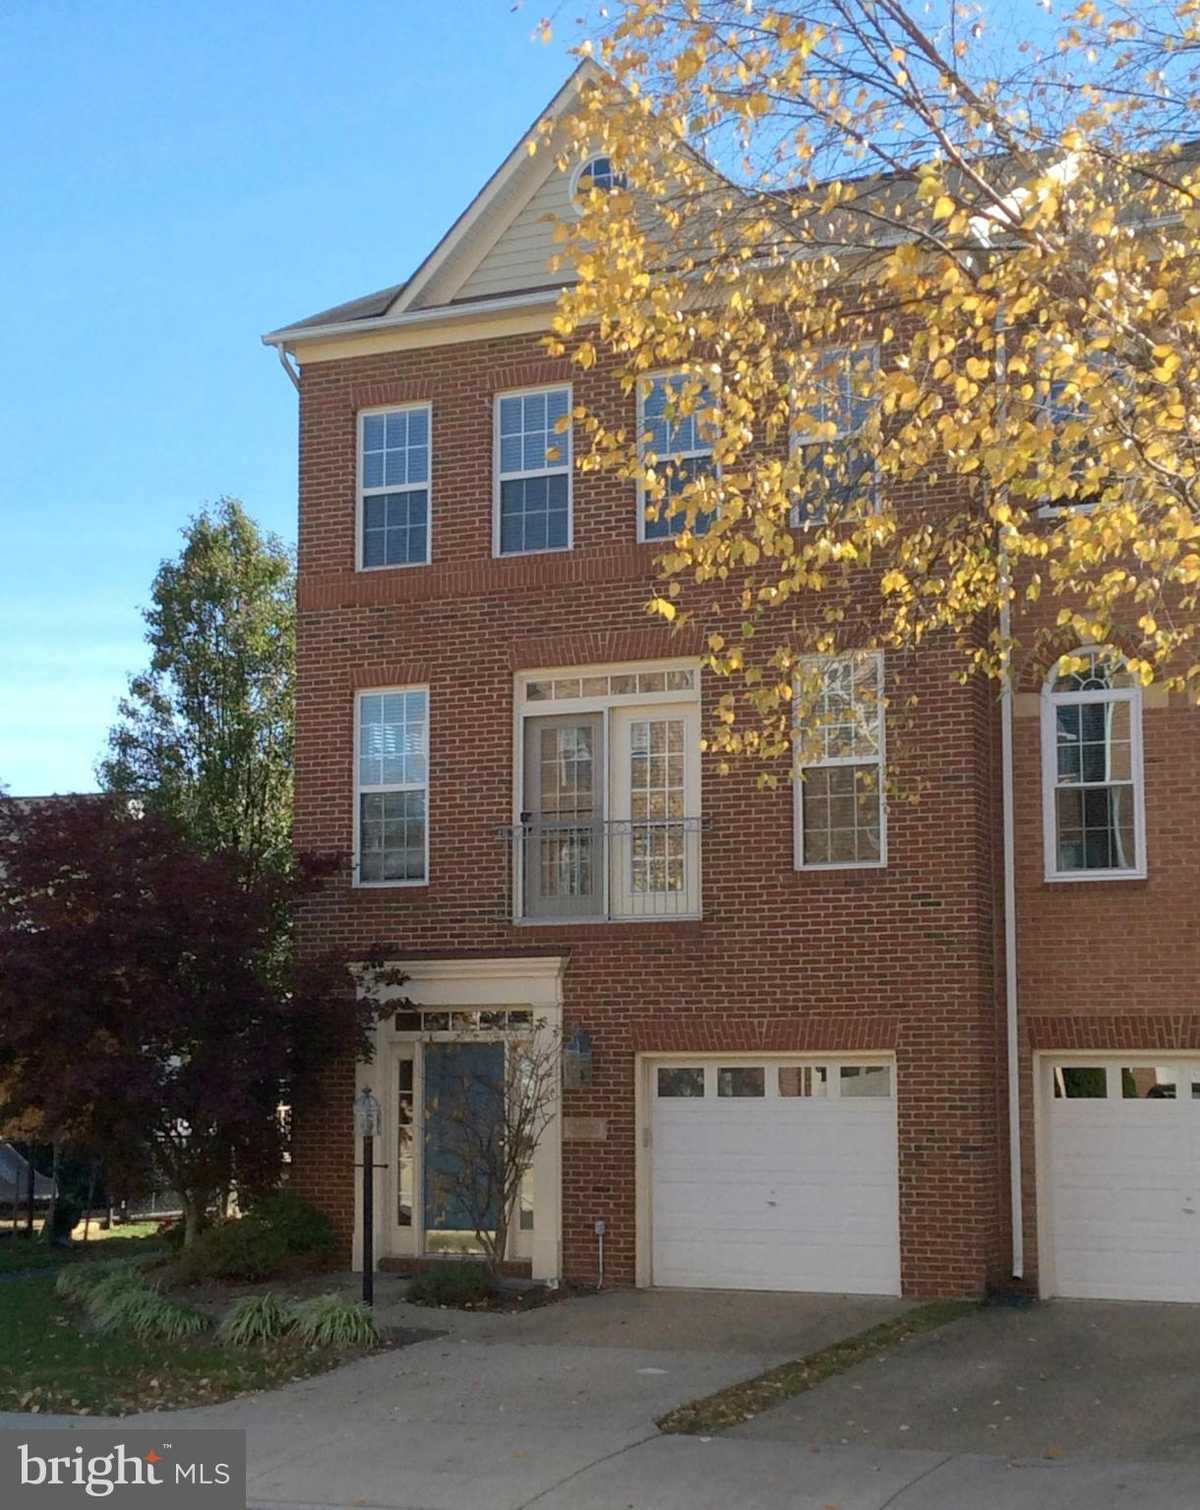 $2,750 - 3Br/4Ba -  for Sale in Squirrel Hill, Herndon